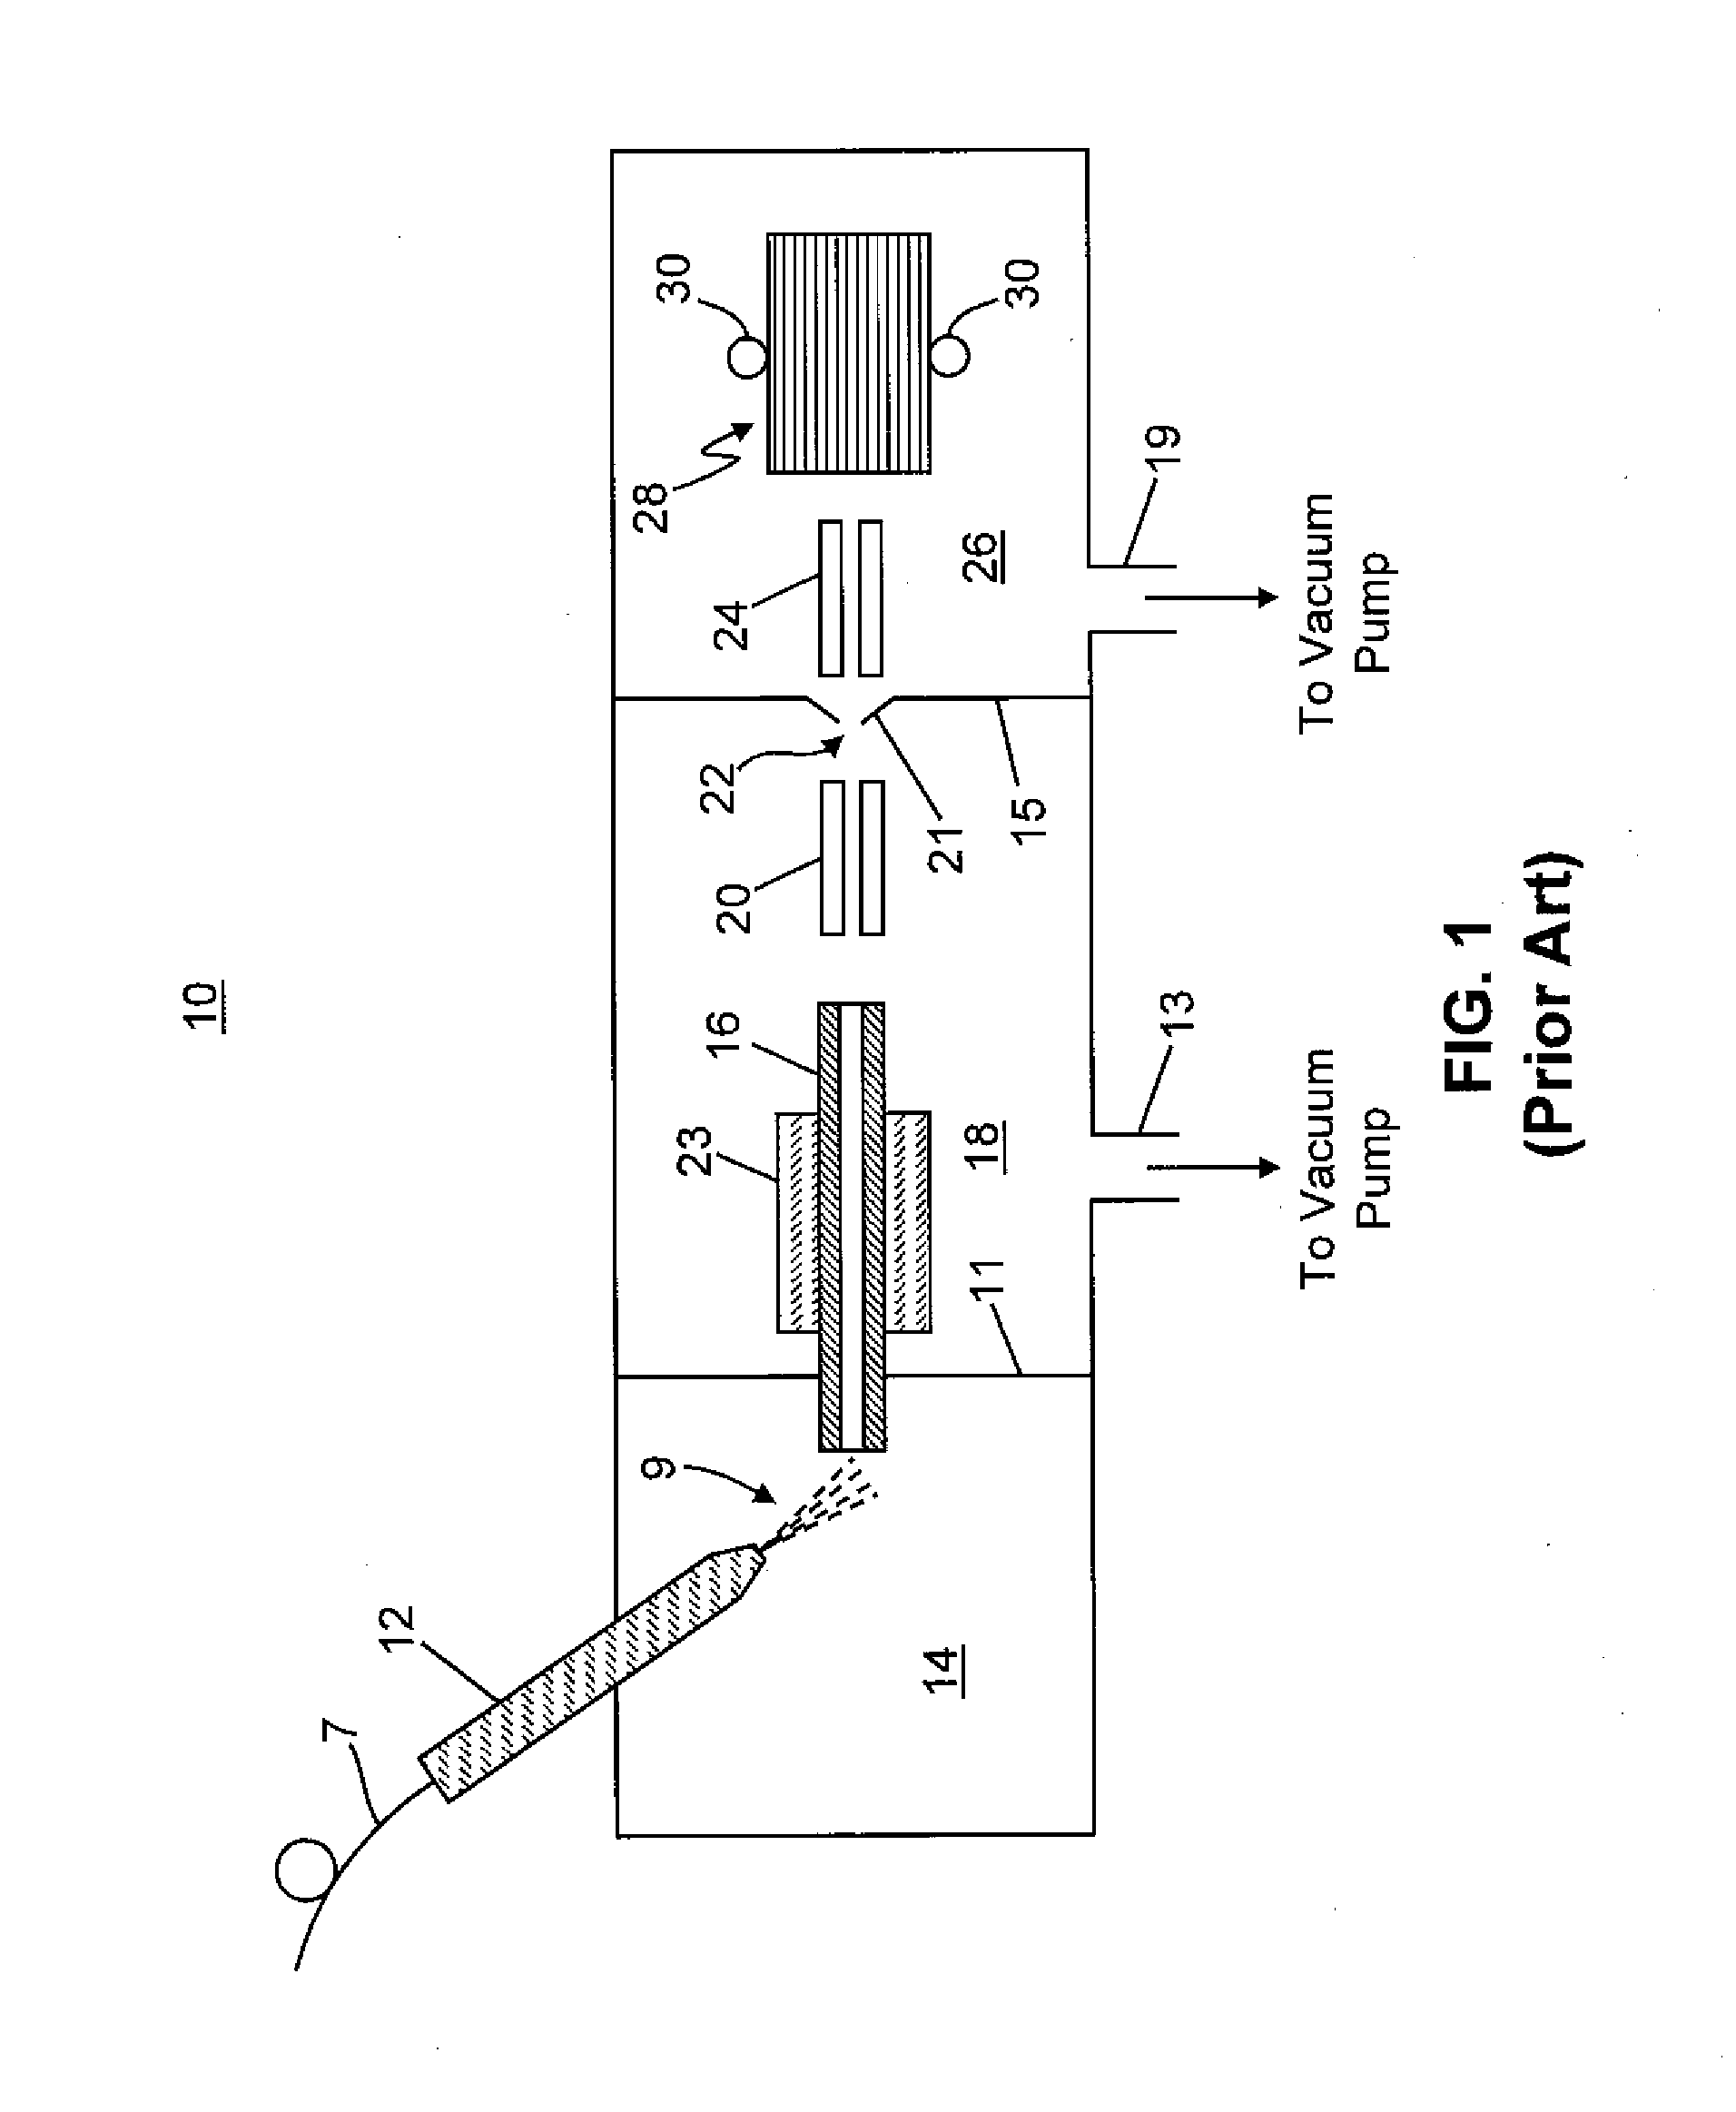 Ion Transfer Tube for a Mass Spectrometer System